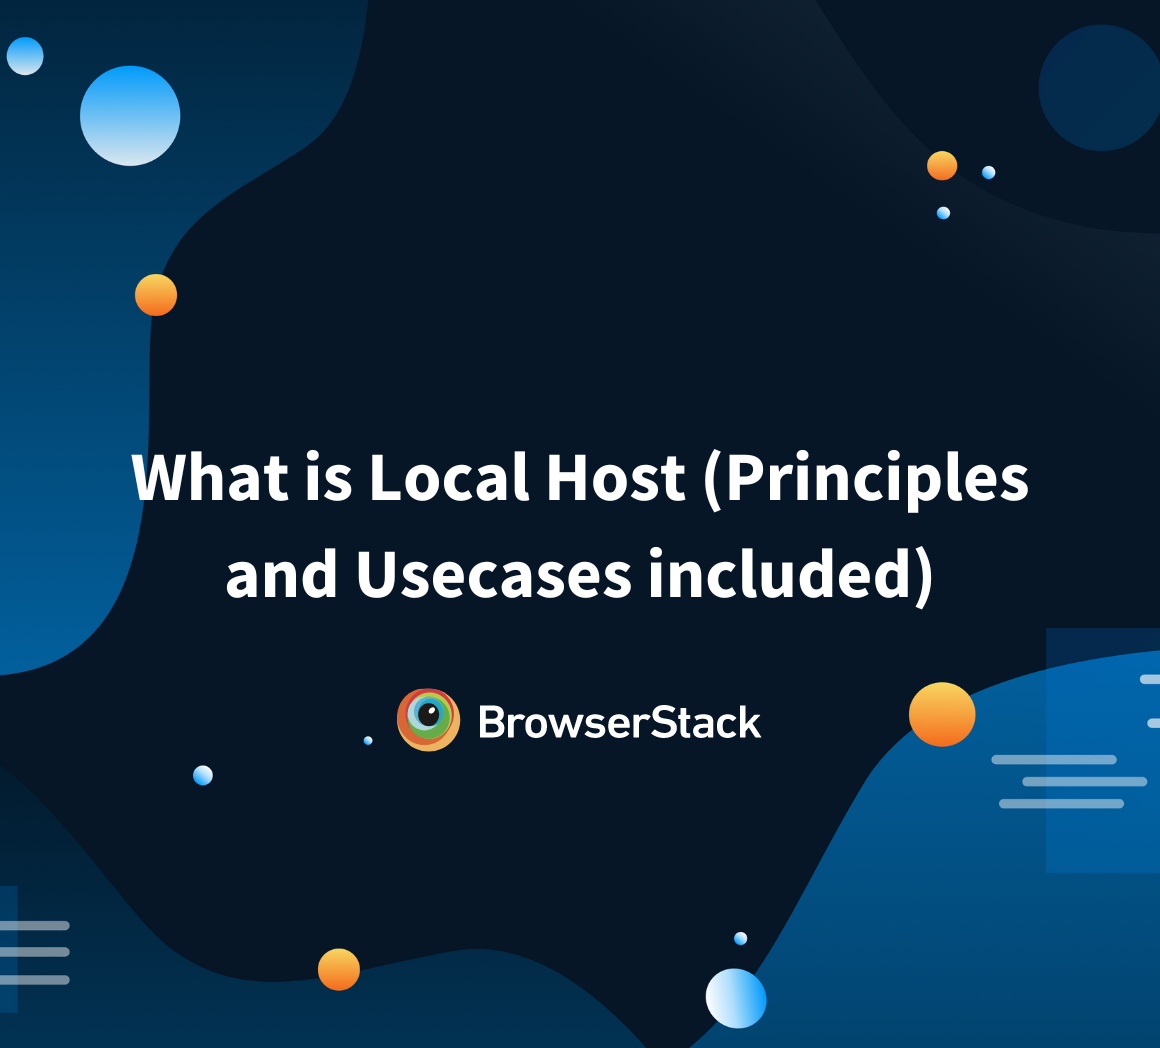 What is Local Host (Principles and Usecases included)